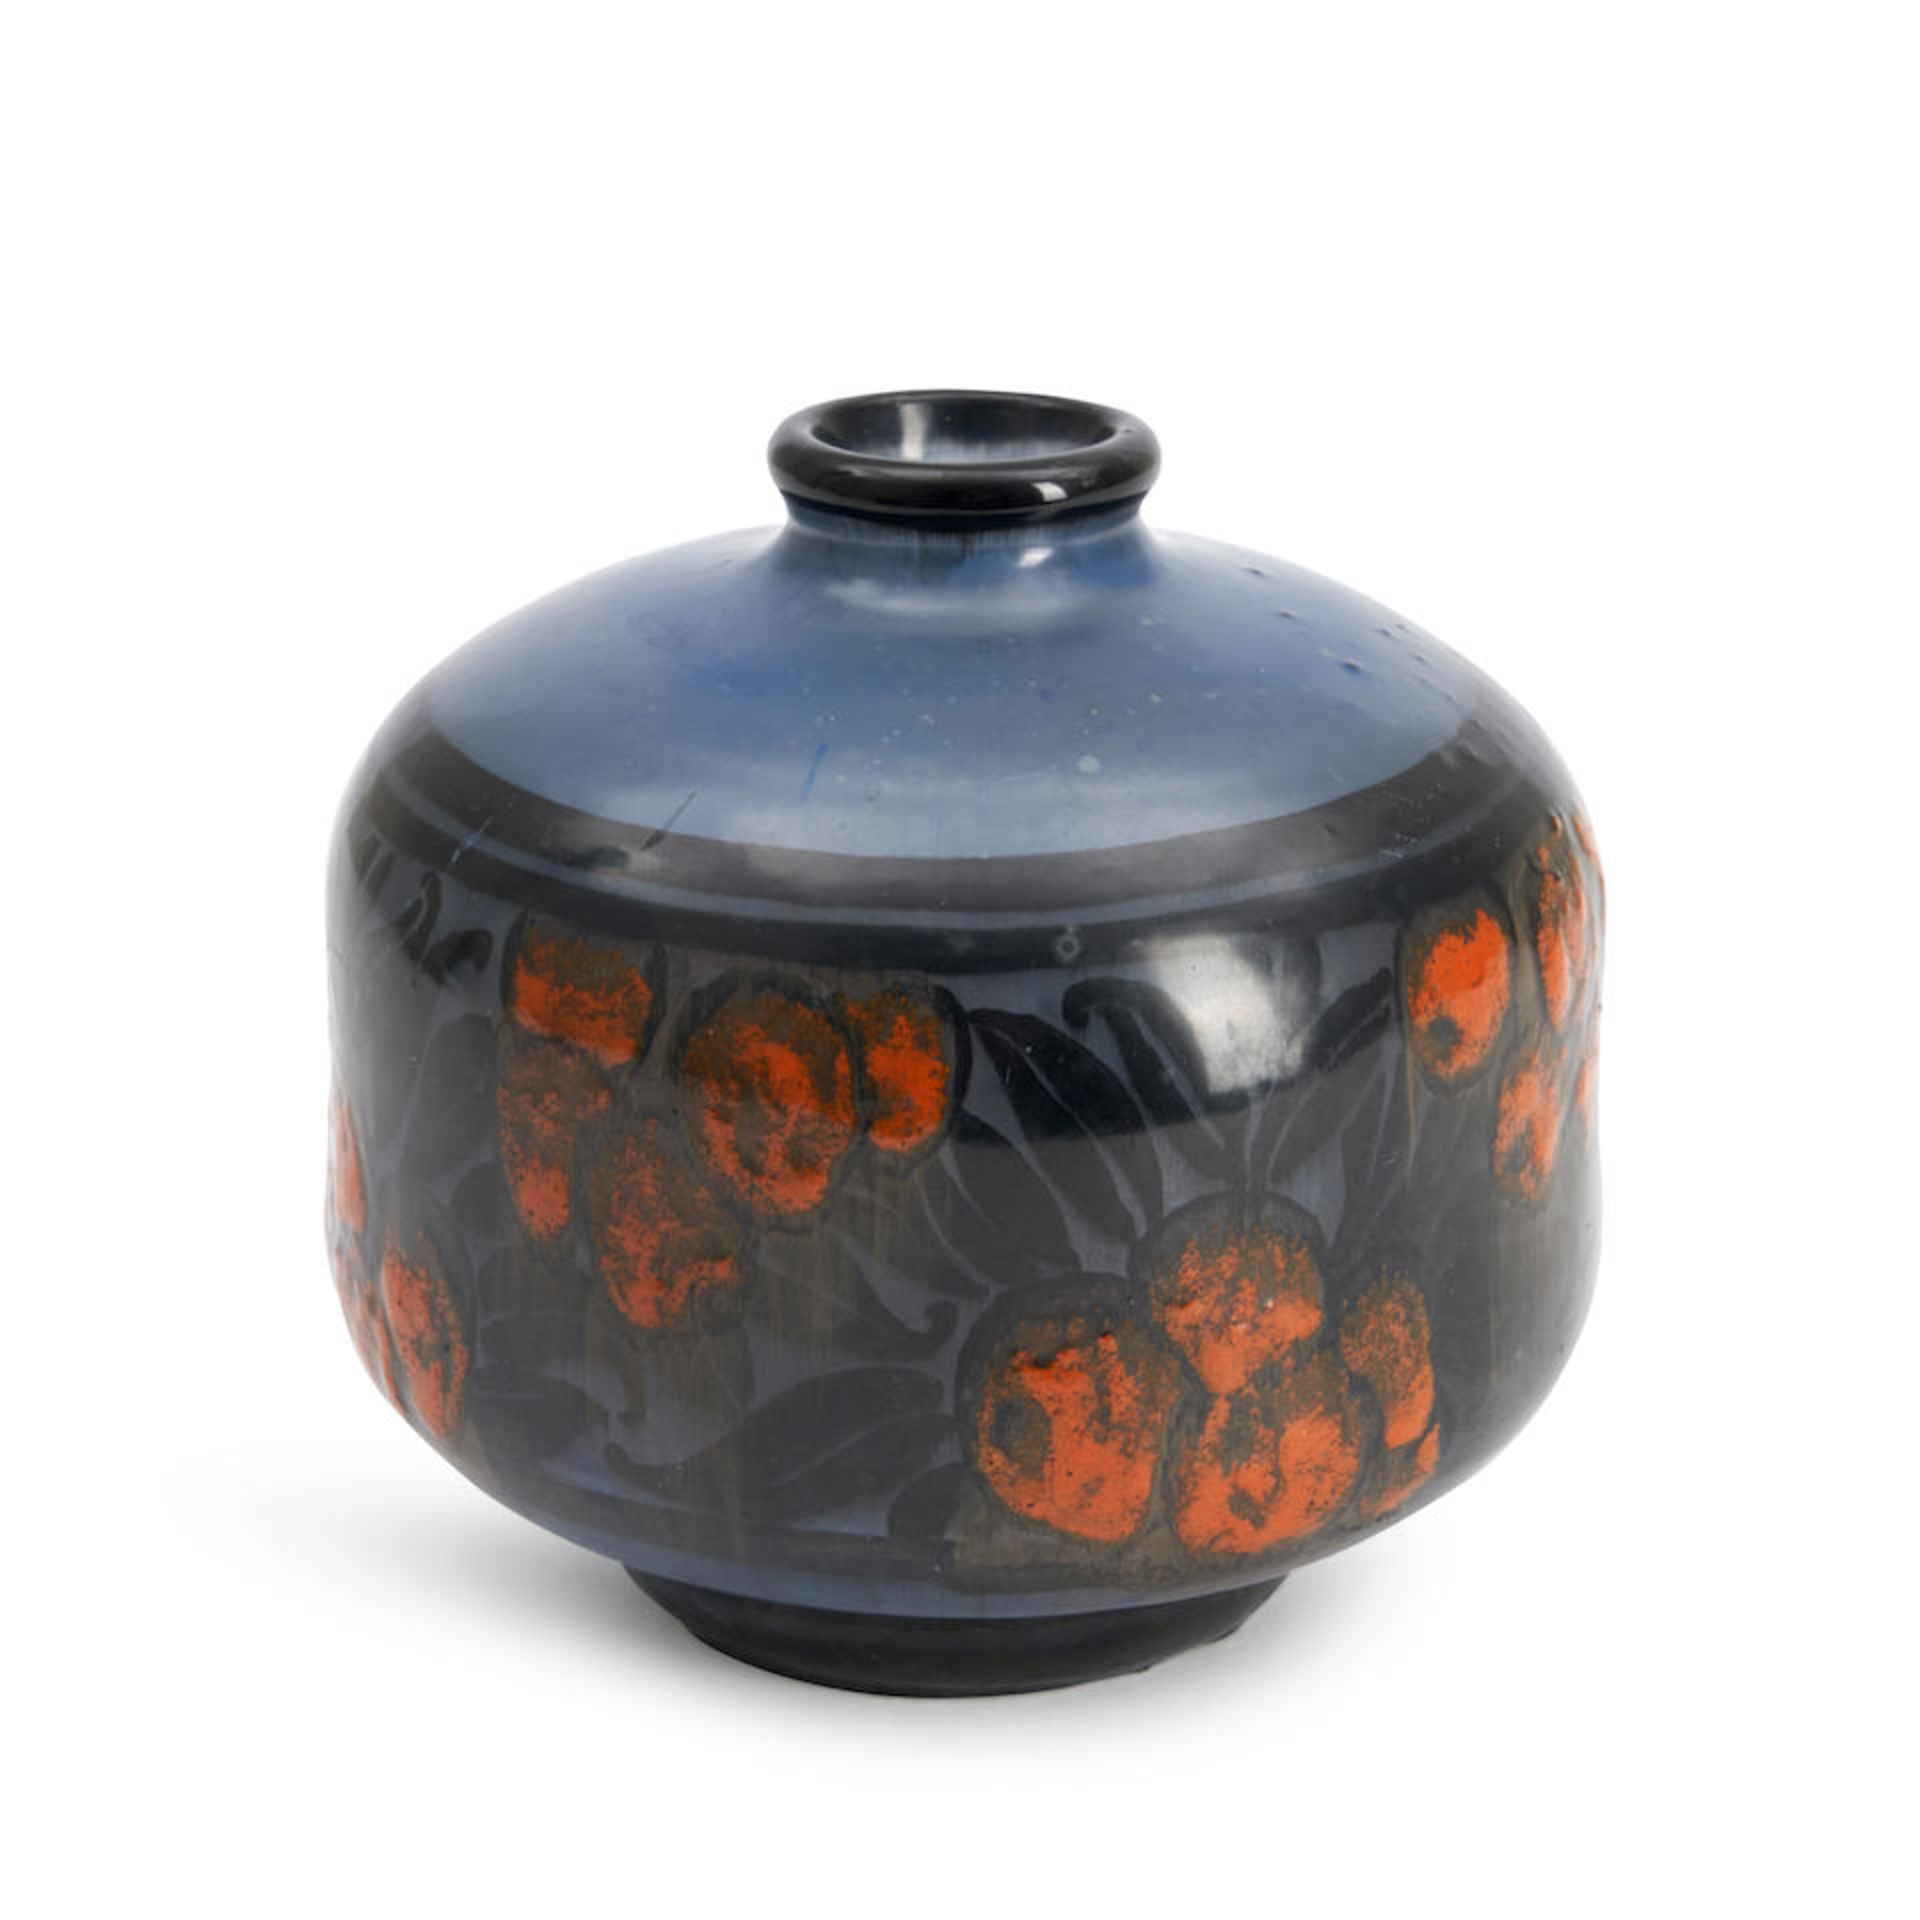 ENAMELED GLASS VASE ATTRIBUTED TO MARCEL GOUPY, France, c. 1920, unmarked, ht. 5 in.